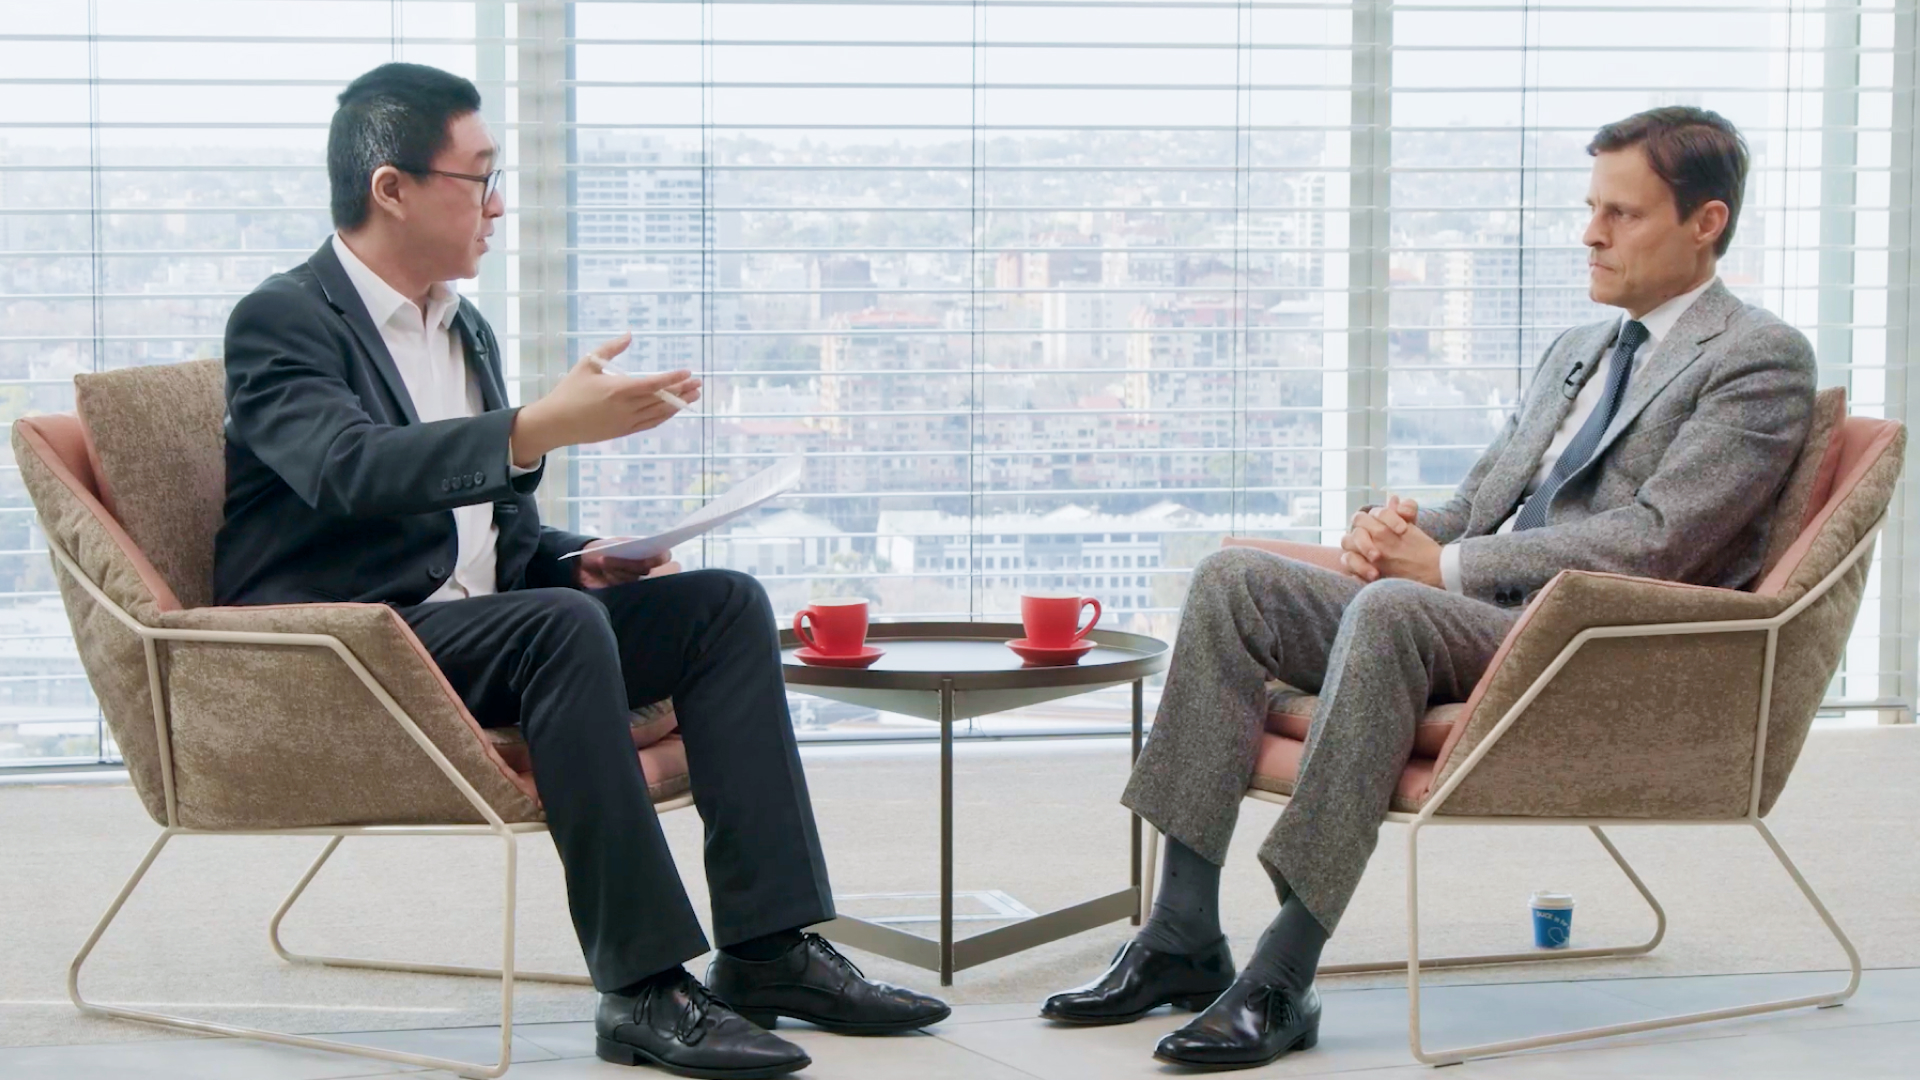 Livewire's Hans Lee in conversation with Fidelity International's Anthony Srom